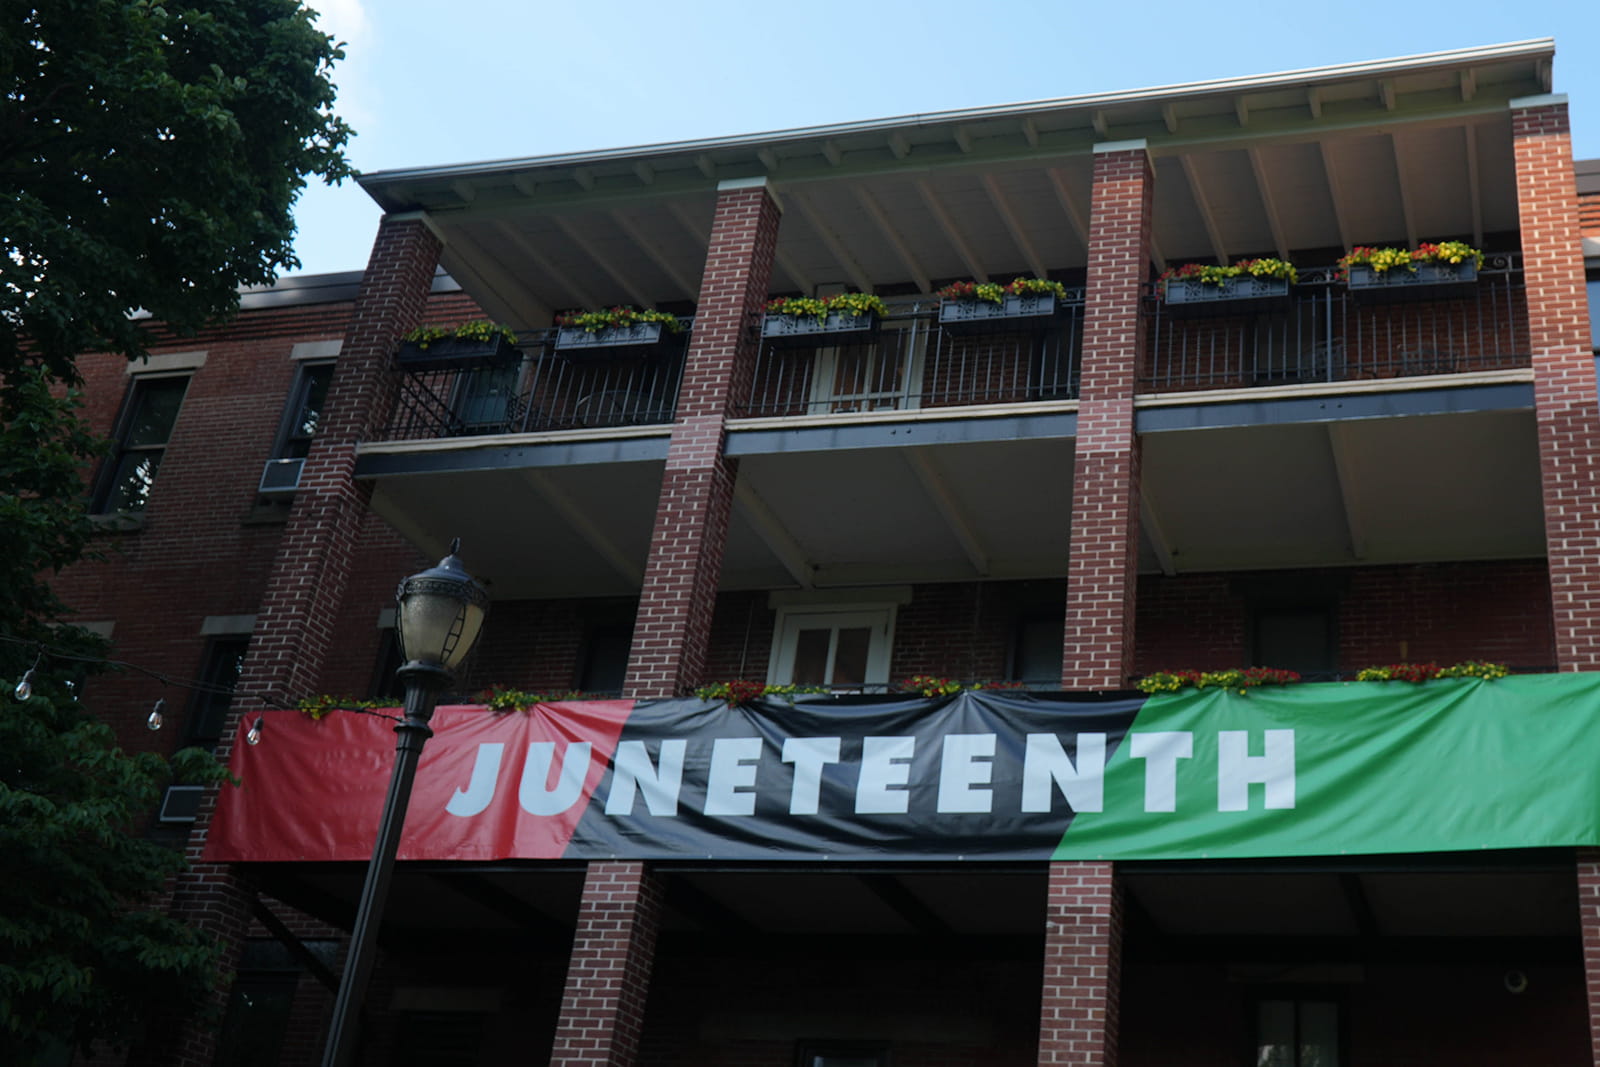  A Juneteenth banner hanging on the exterior of the Rush Building.